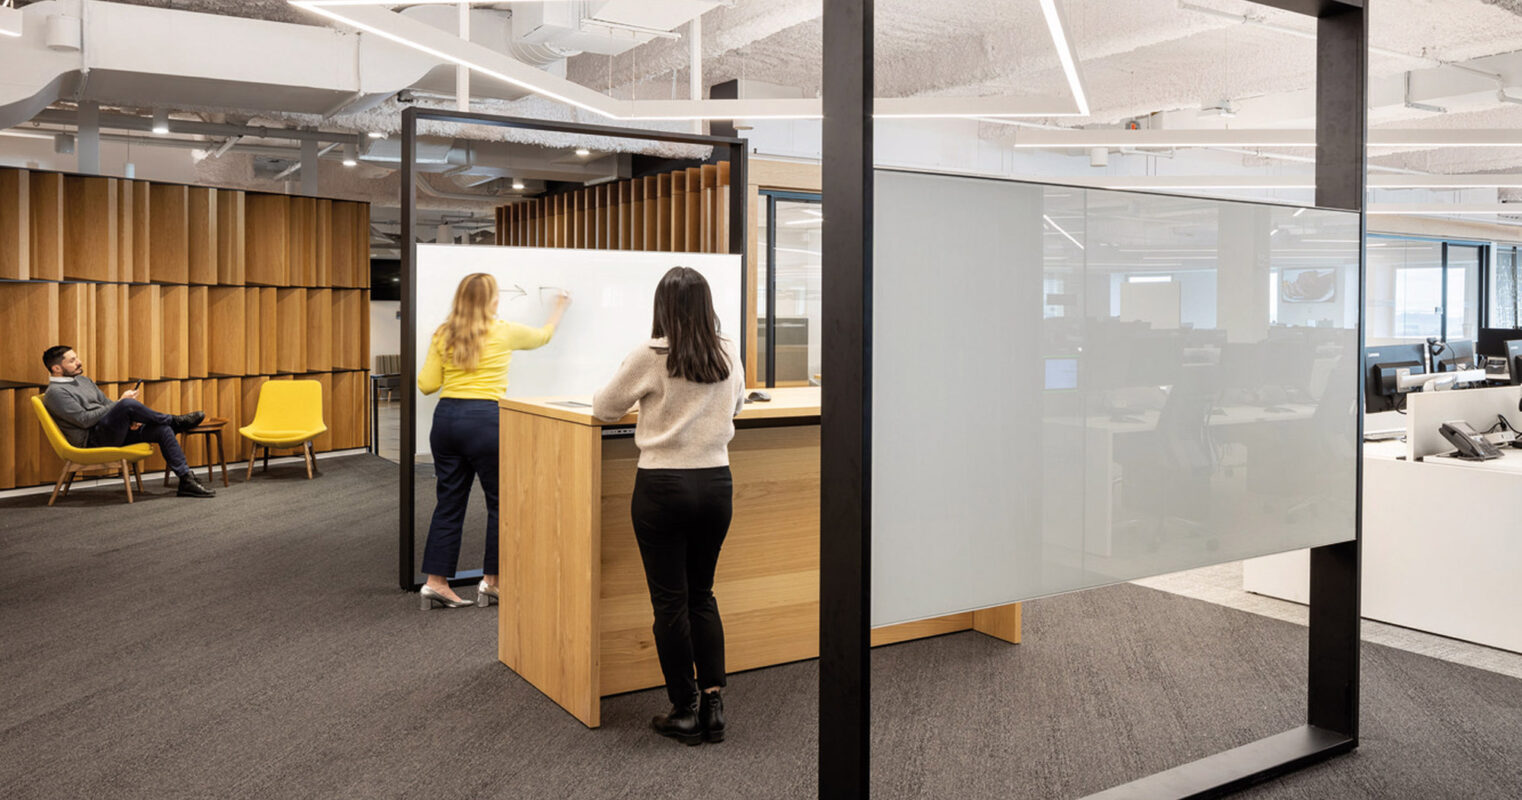 Open-plan office featuring a harmonious blend of natural wood panels and modern furnishings. Glass partitions provide transparency, while acoustic ceiling panels enhance comfort. Individuals engage in collaborative work in this well-lit, contemporary space.